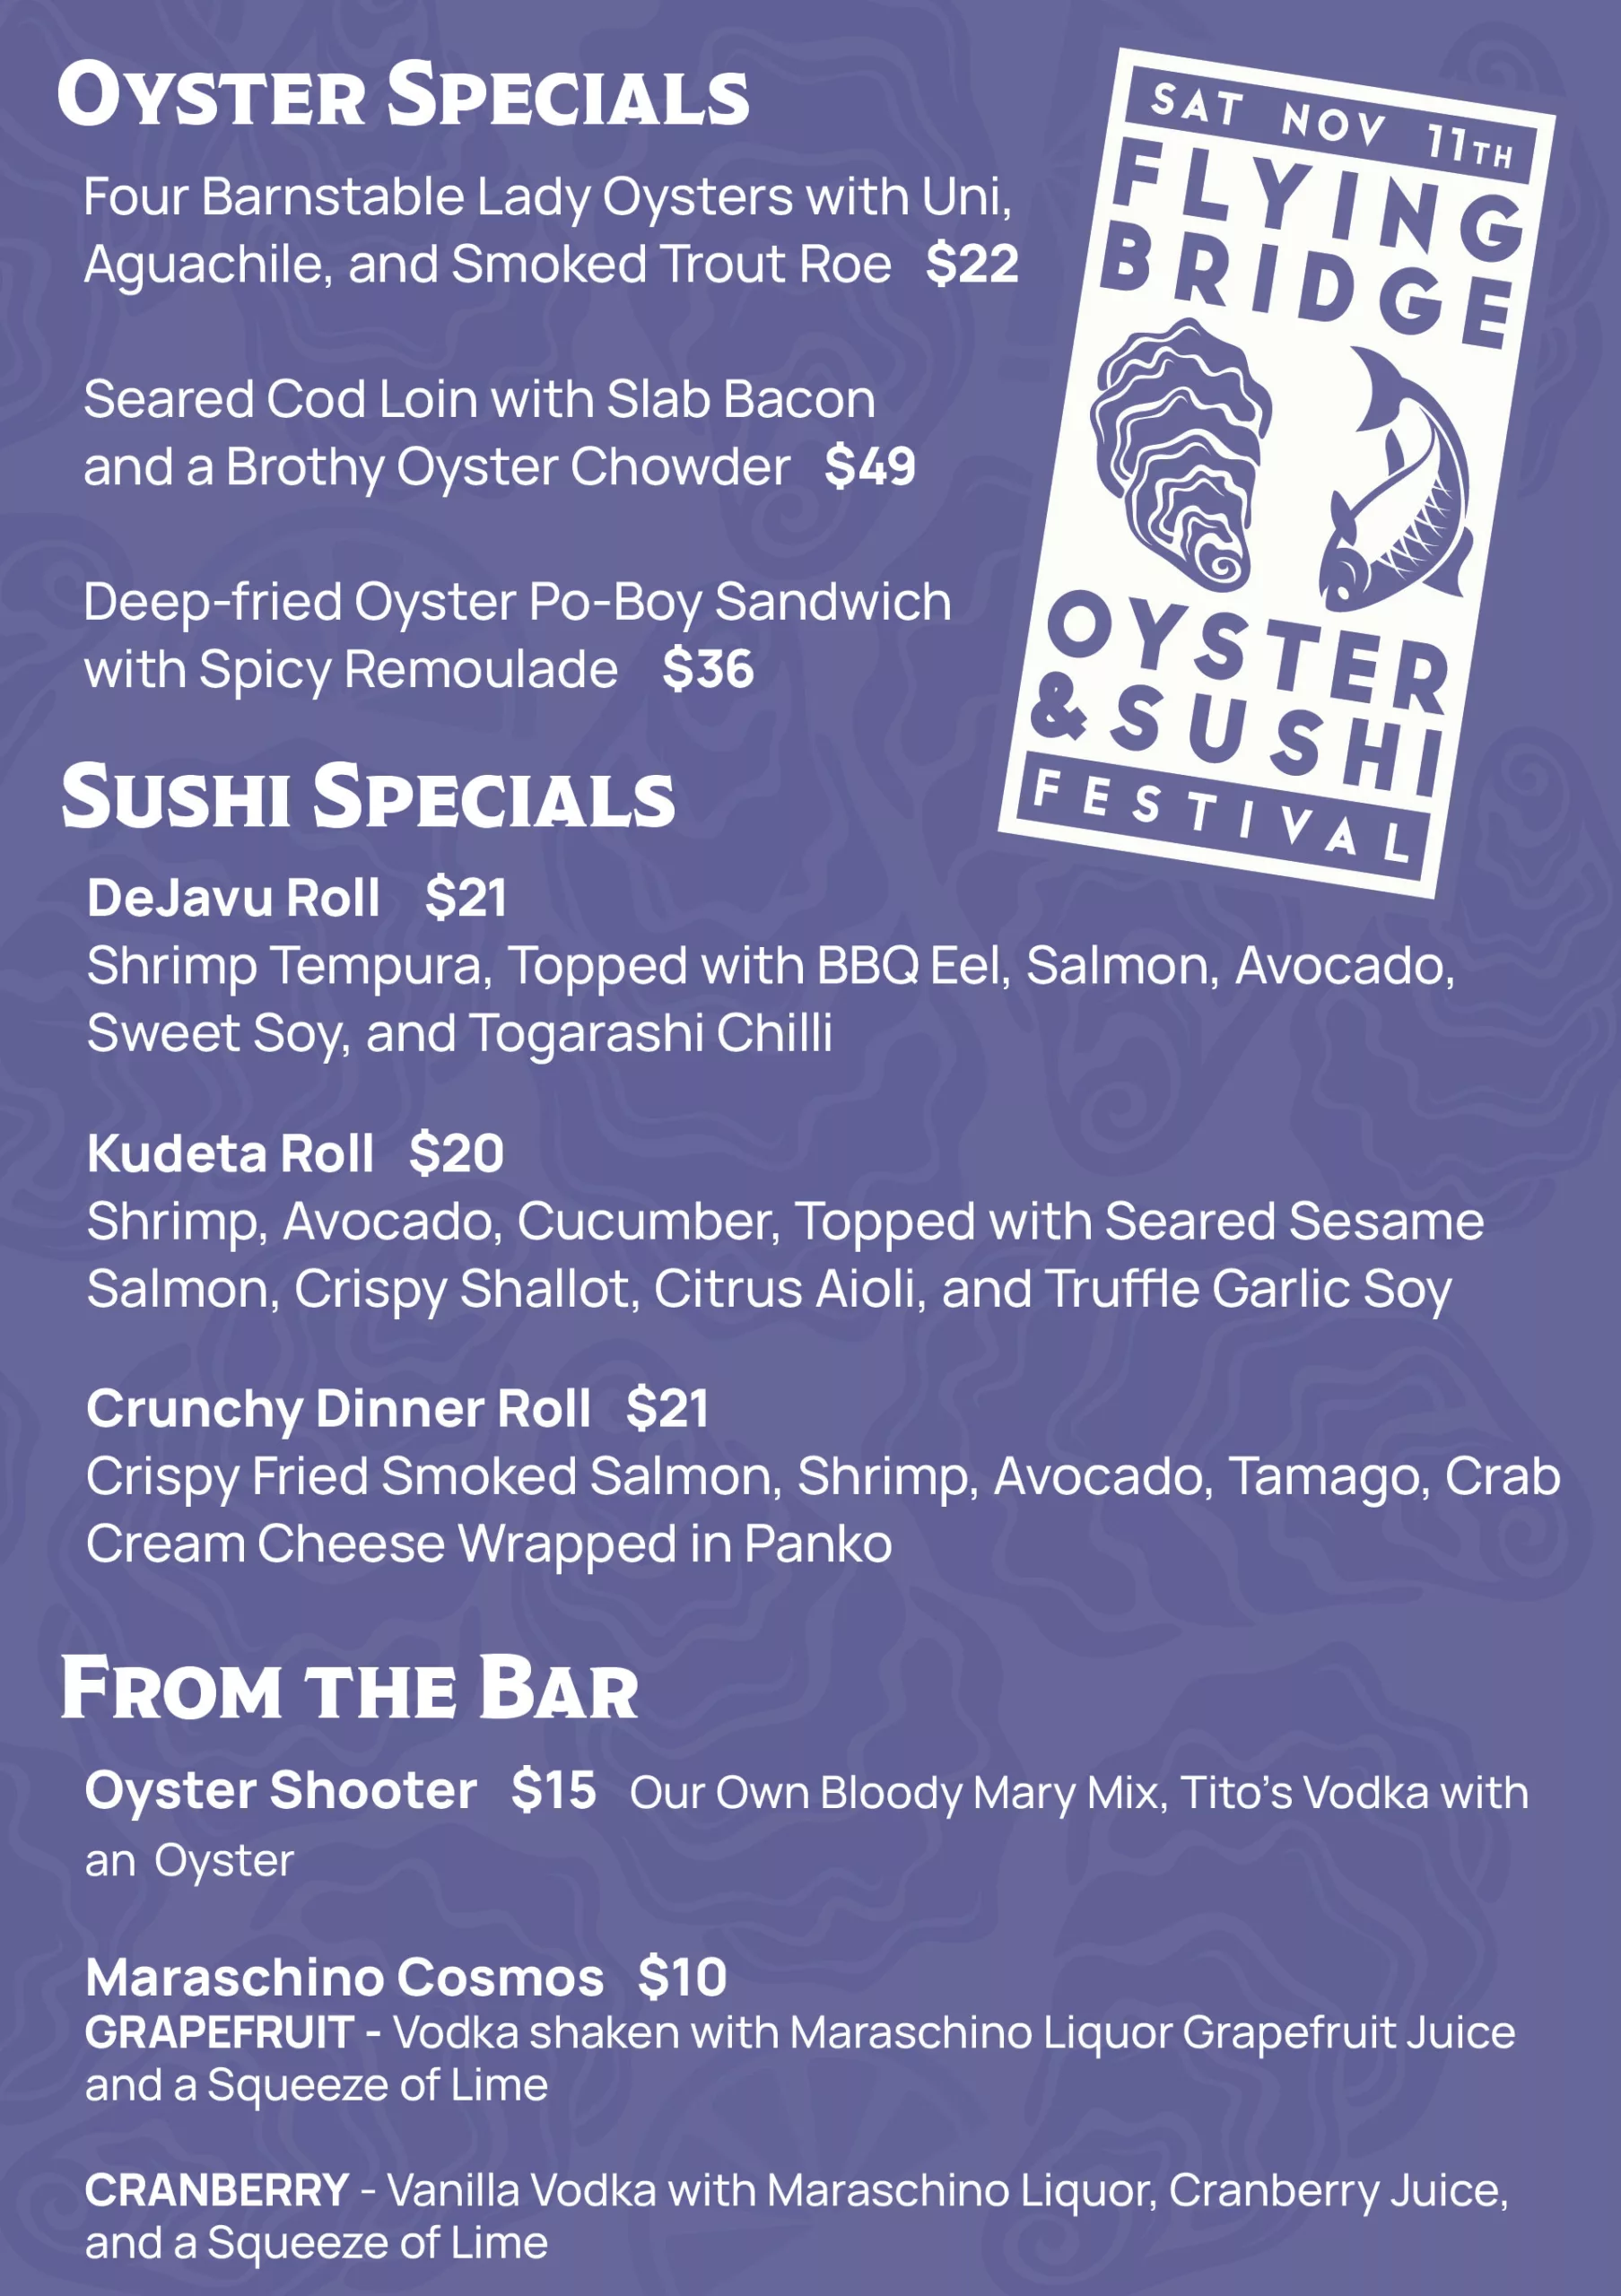 Sushi & Oyster Festival Specials